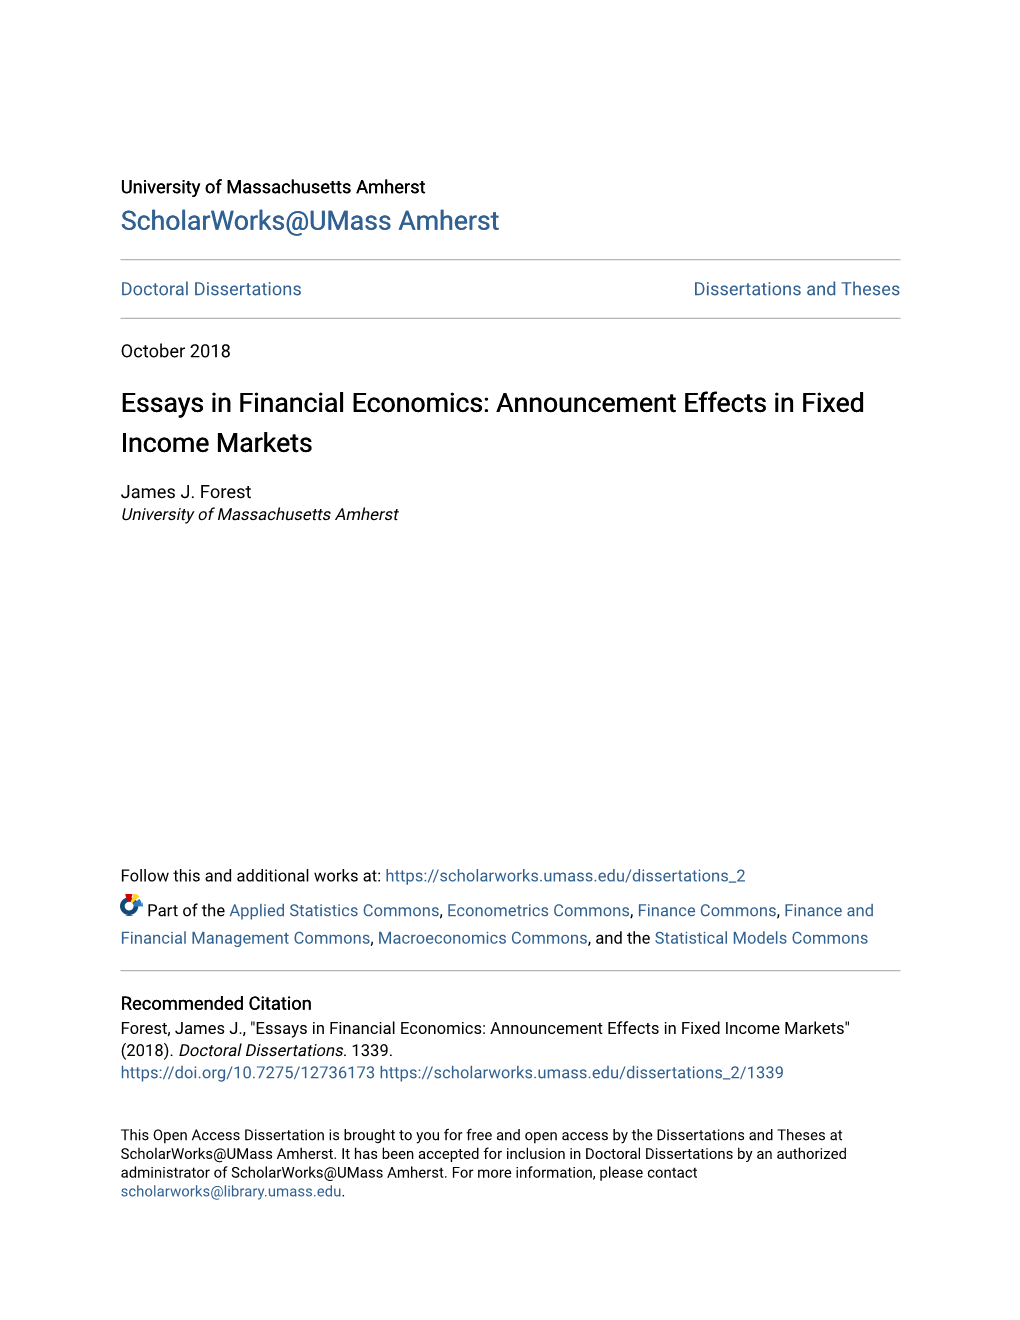 Essays in Financial Economics: Announcement Effects in Fixed Income Markets